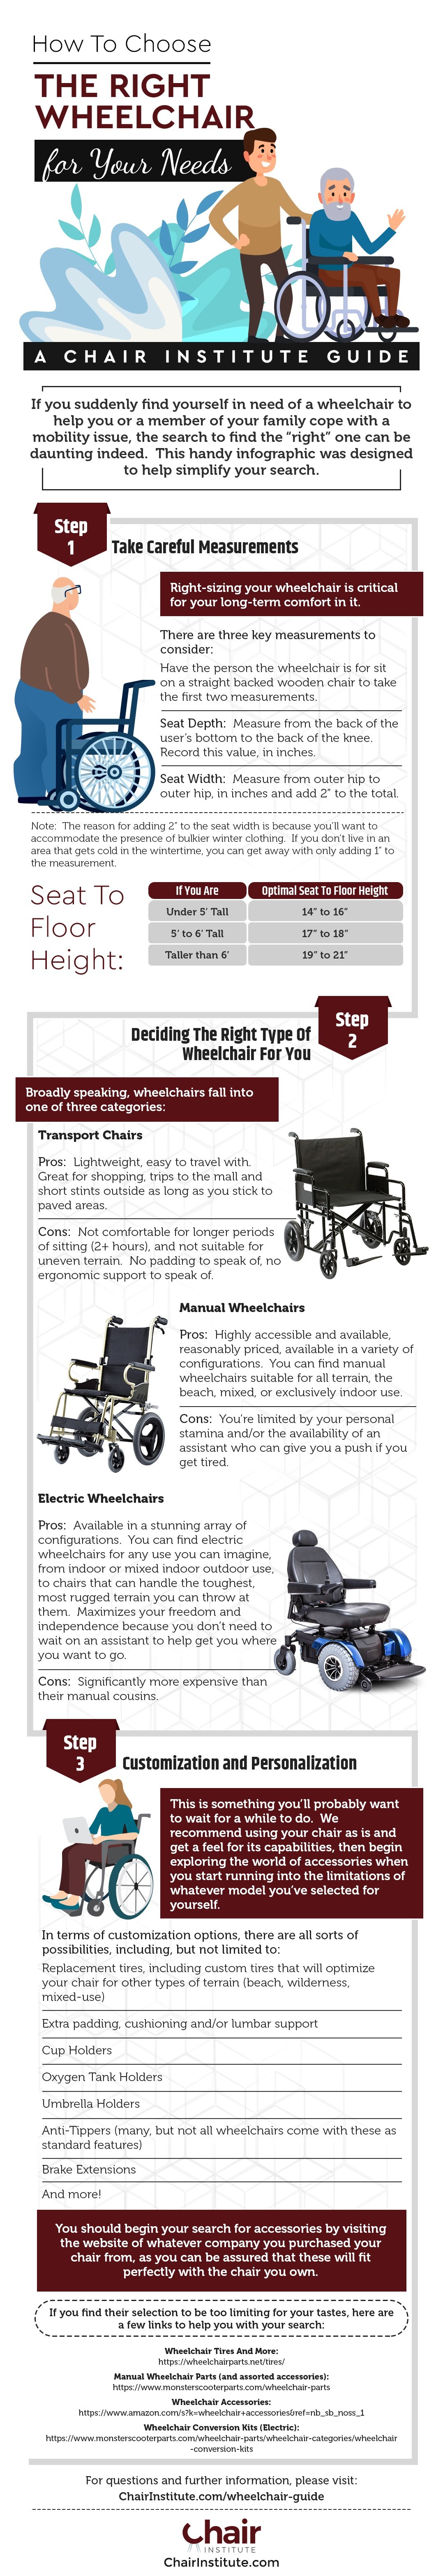 Infographic of How to Choose the Right Wheelchair for Your Needs, by ChairInstitute.com